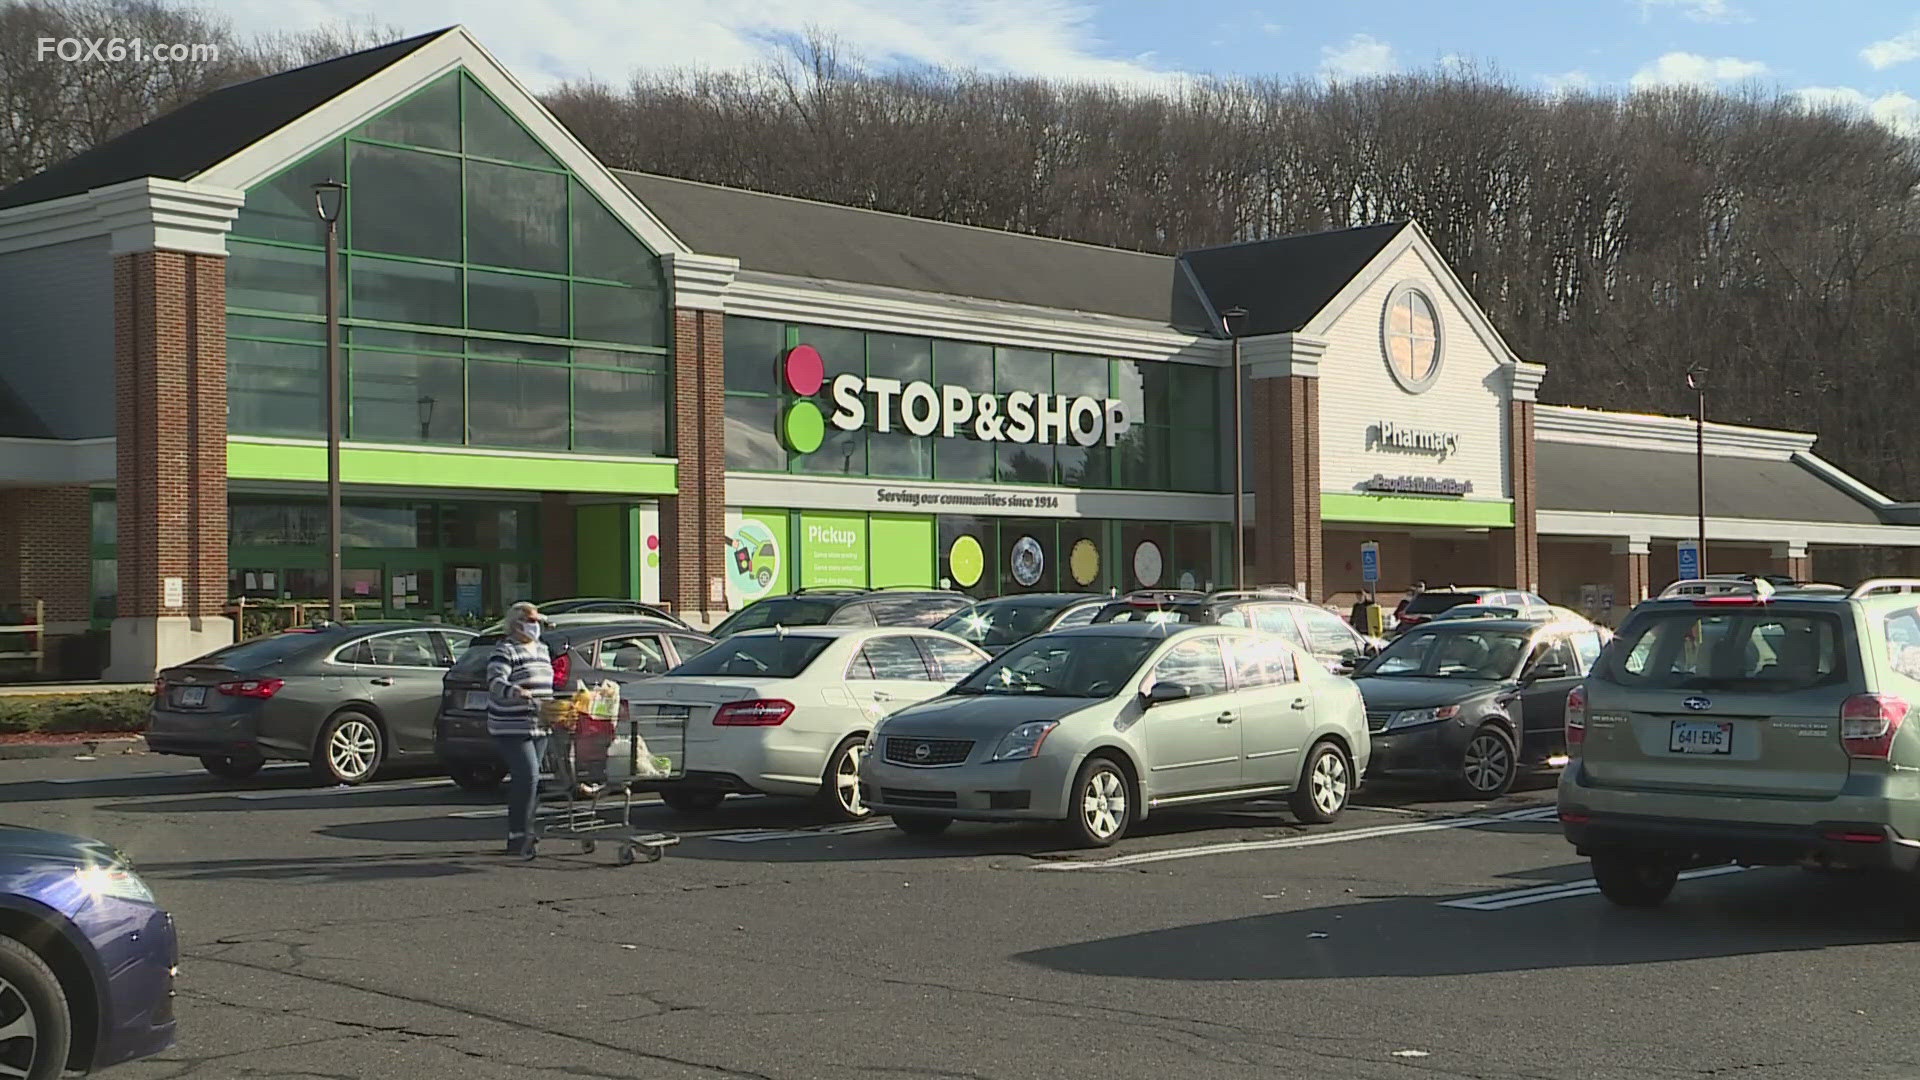 There is currently no word on which locations will be impacted by the closures or when they will be happening. Stop & Shop currently has 88 stores in Connecticut.